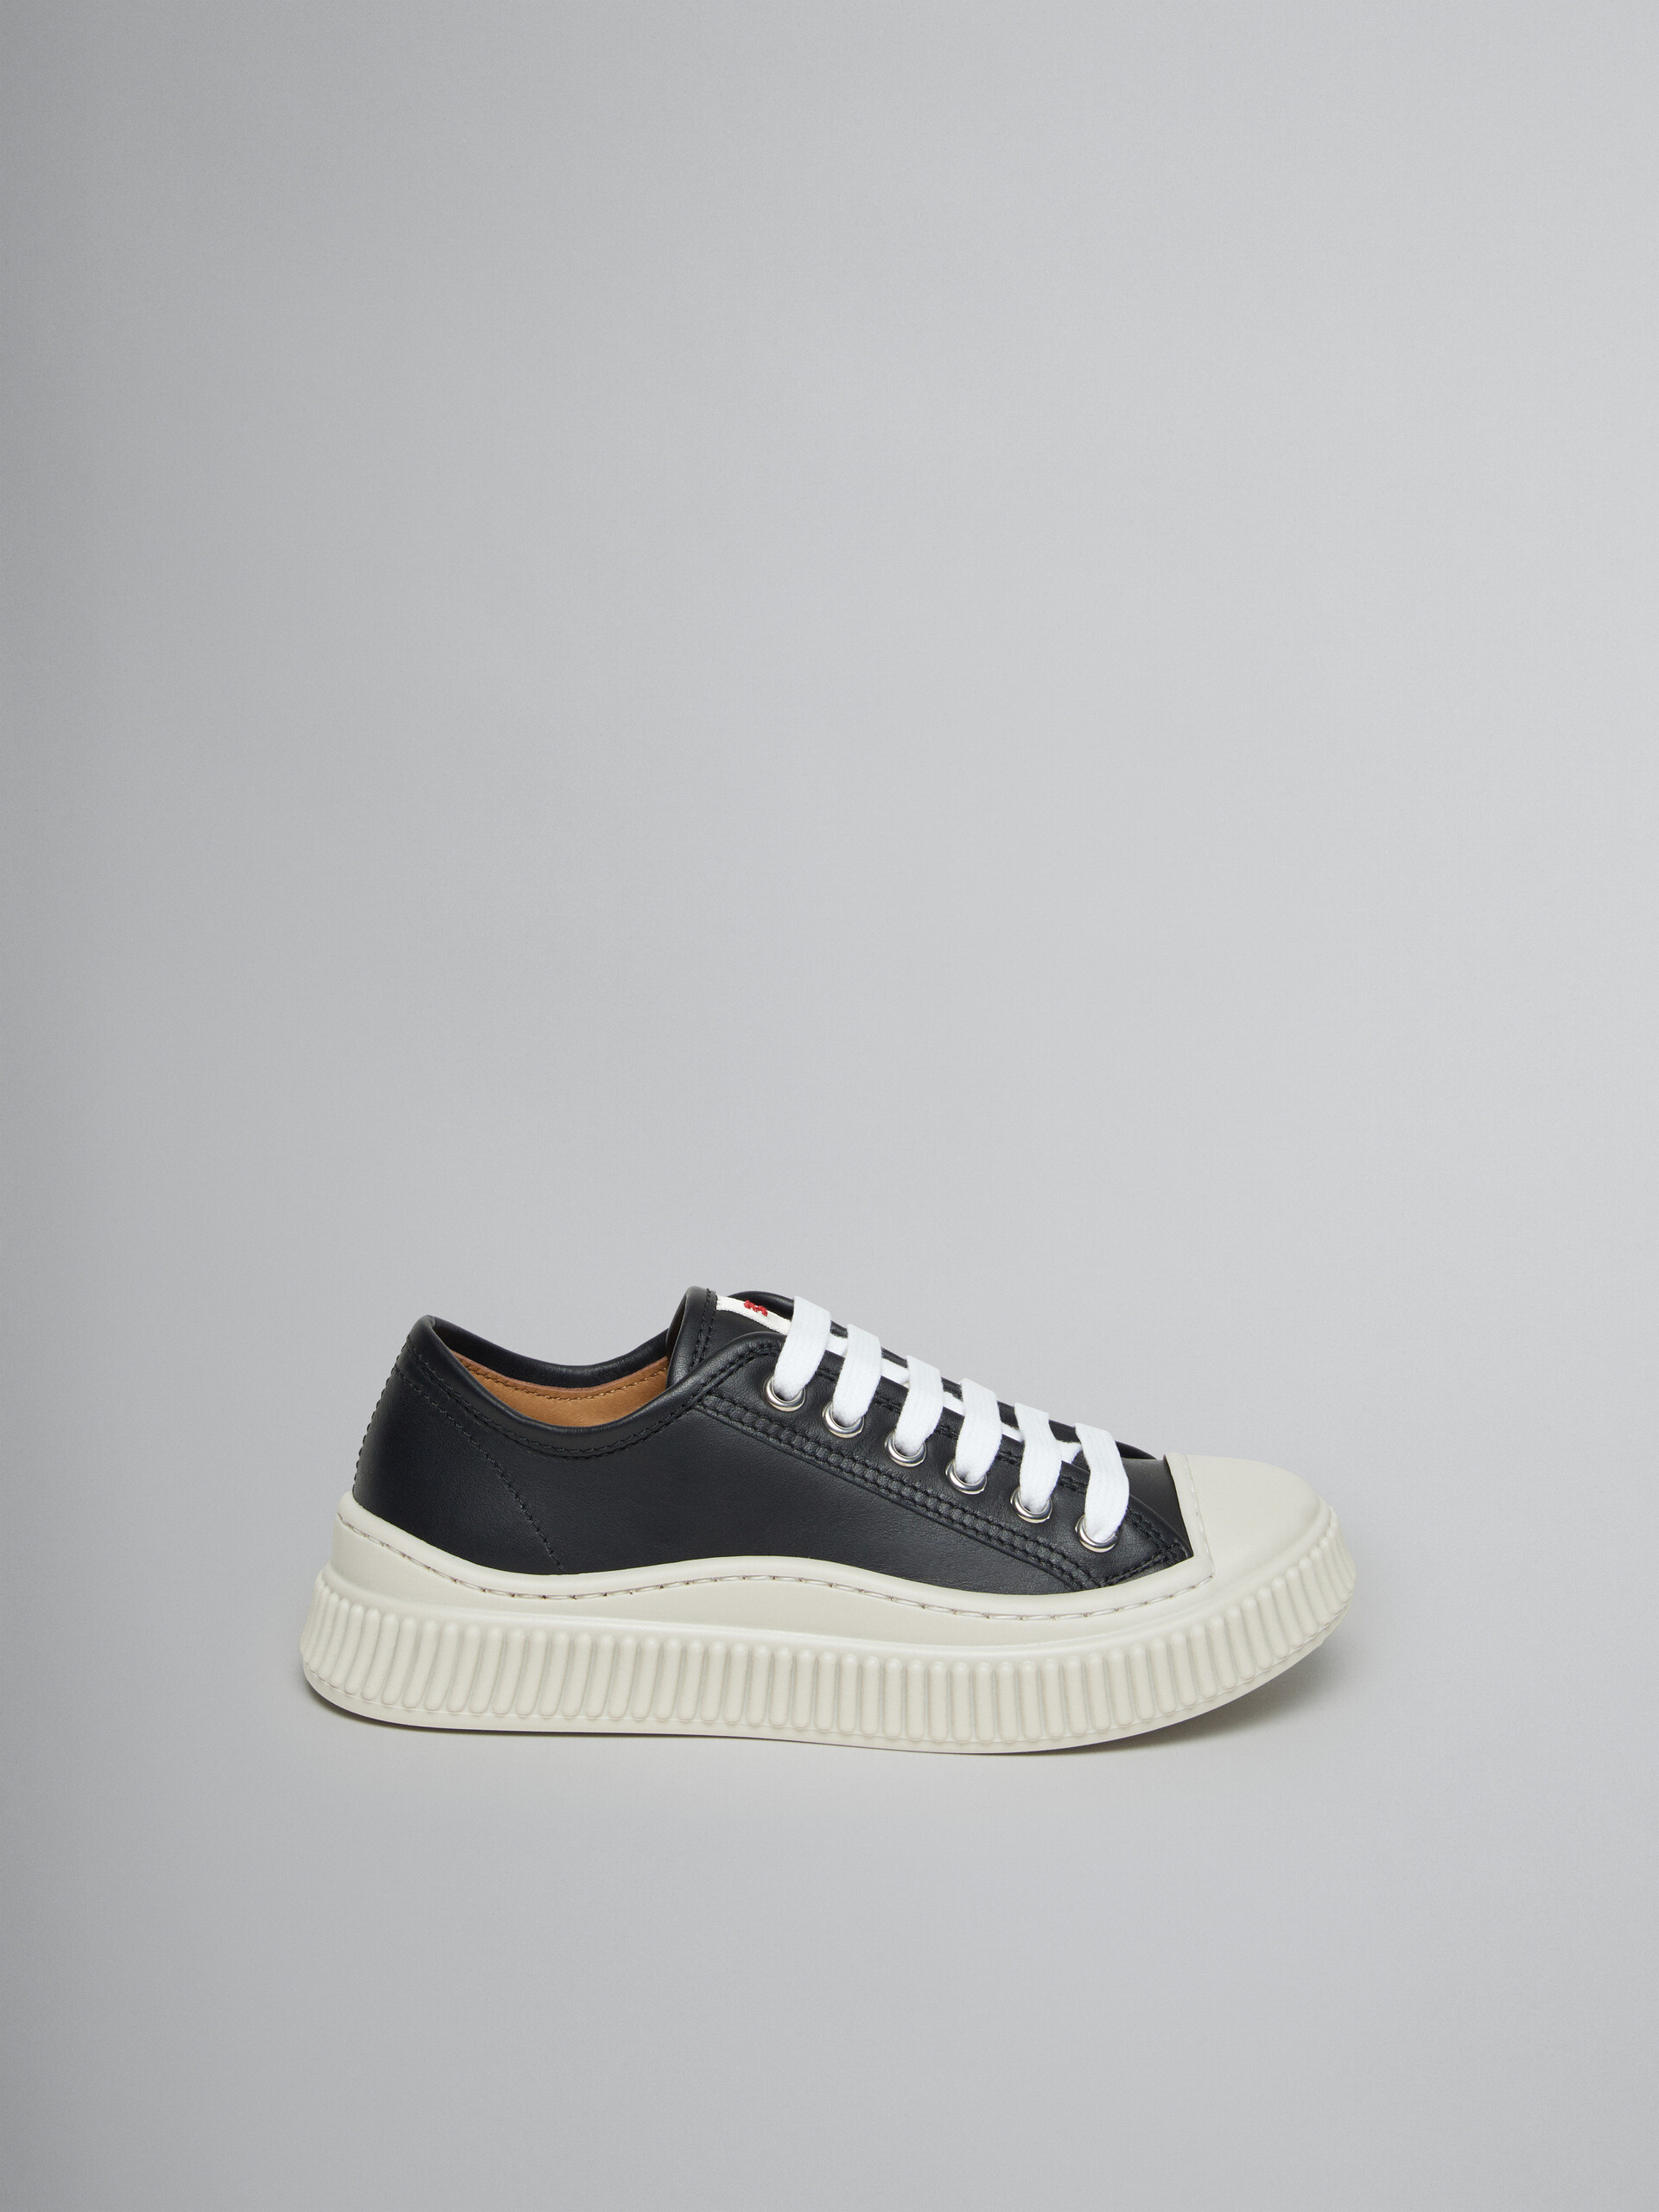 Low top lether Pablo sneaker - Sneakers - Image 1